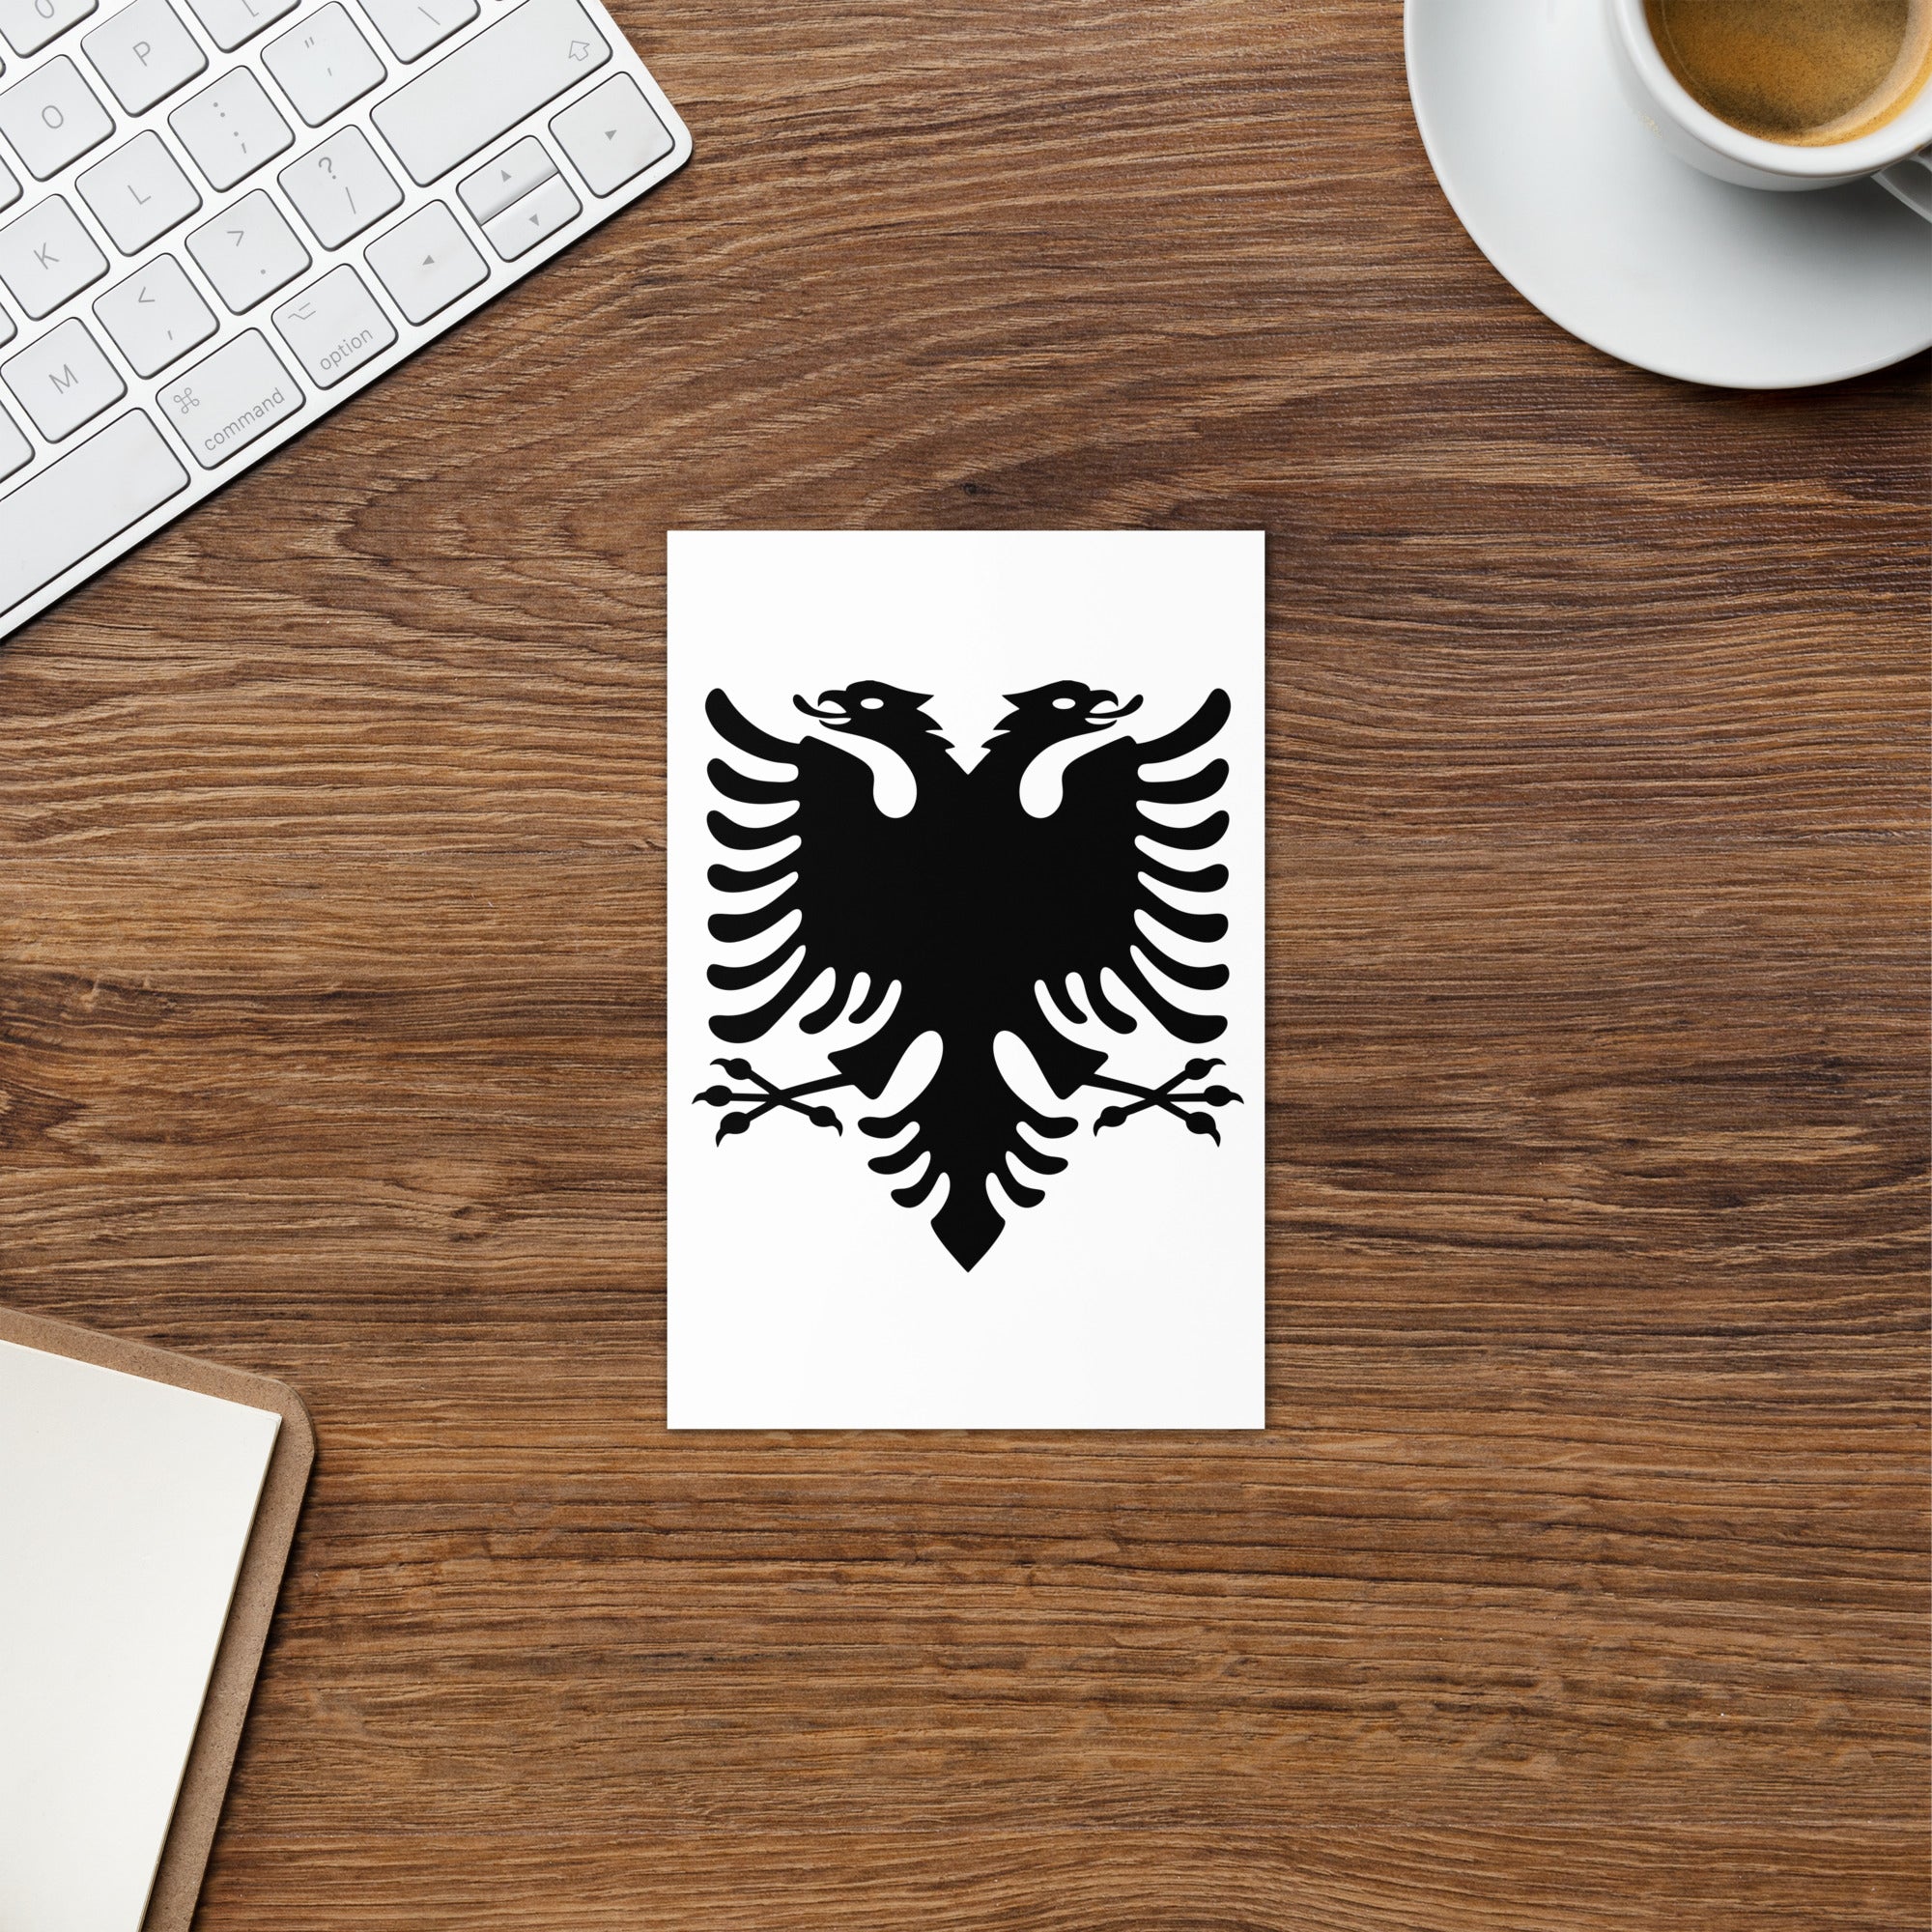 Greeting card with Albanian national symbols.